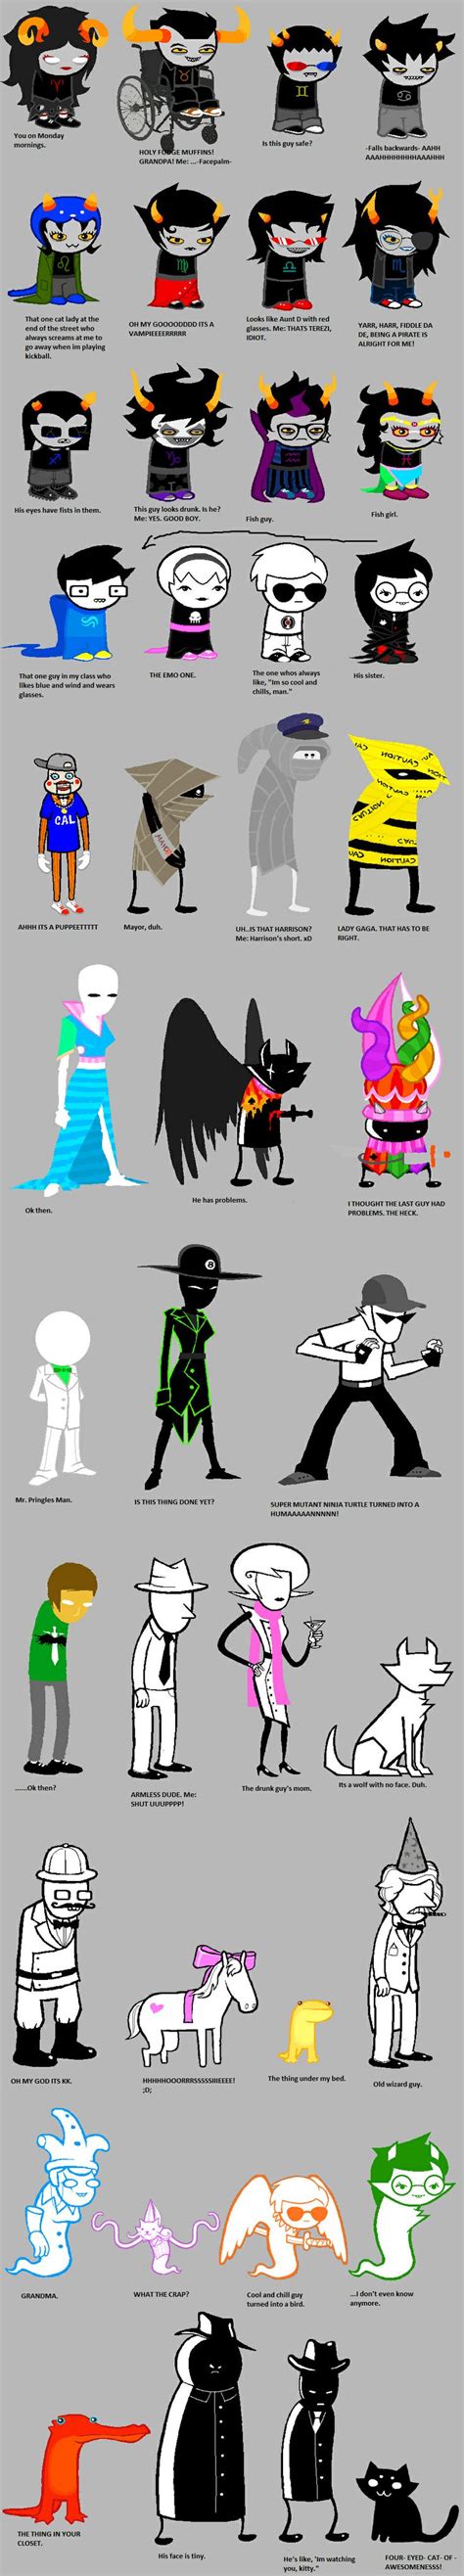 17 best images about home stuck on pinterest jade soul eater and homestuck grubs